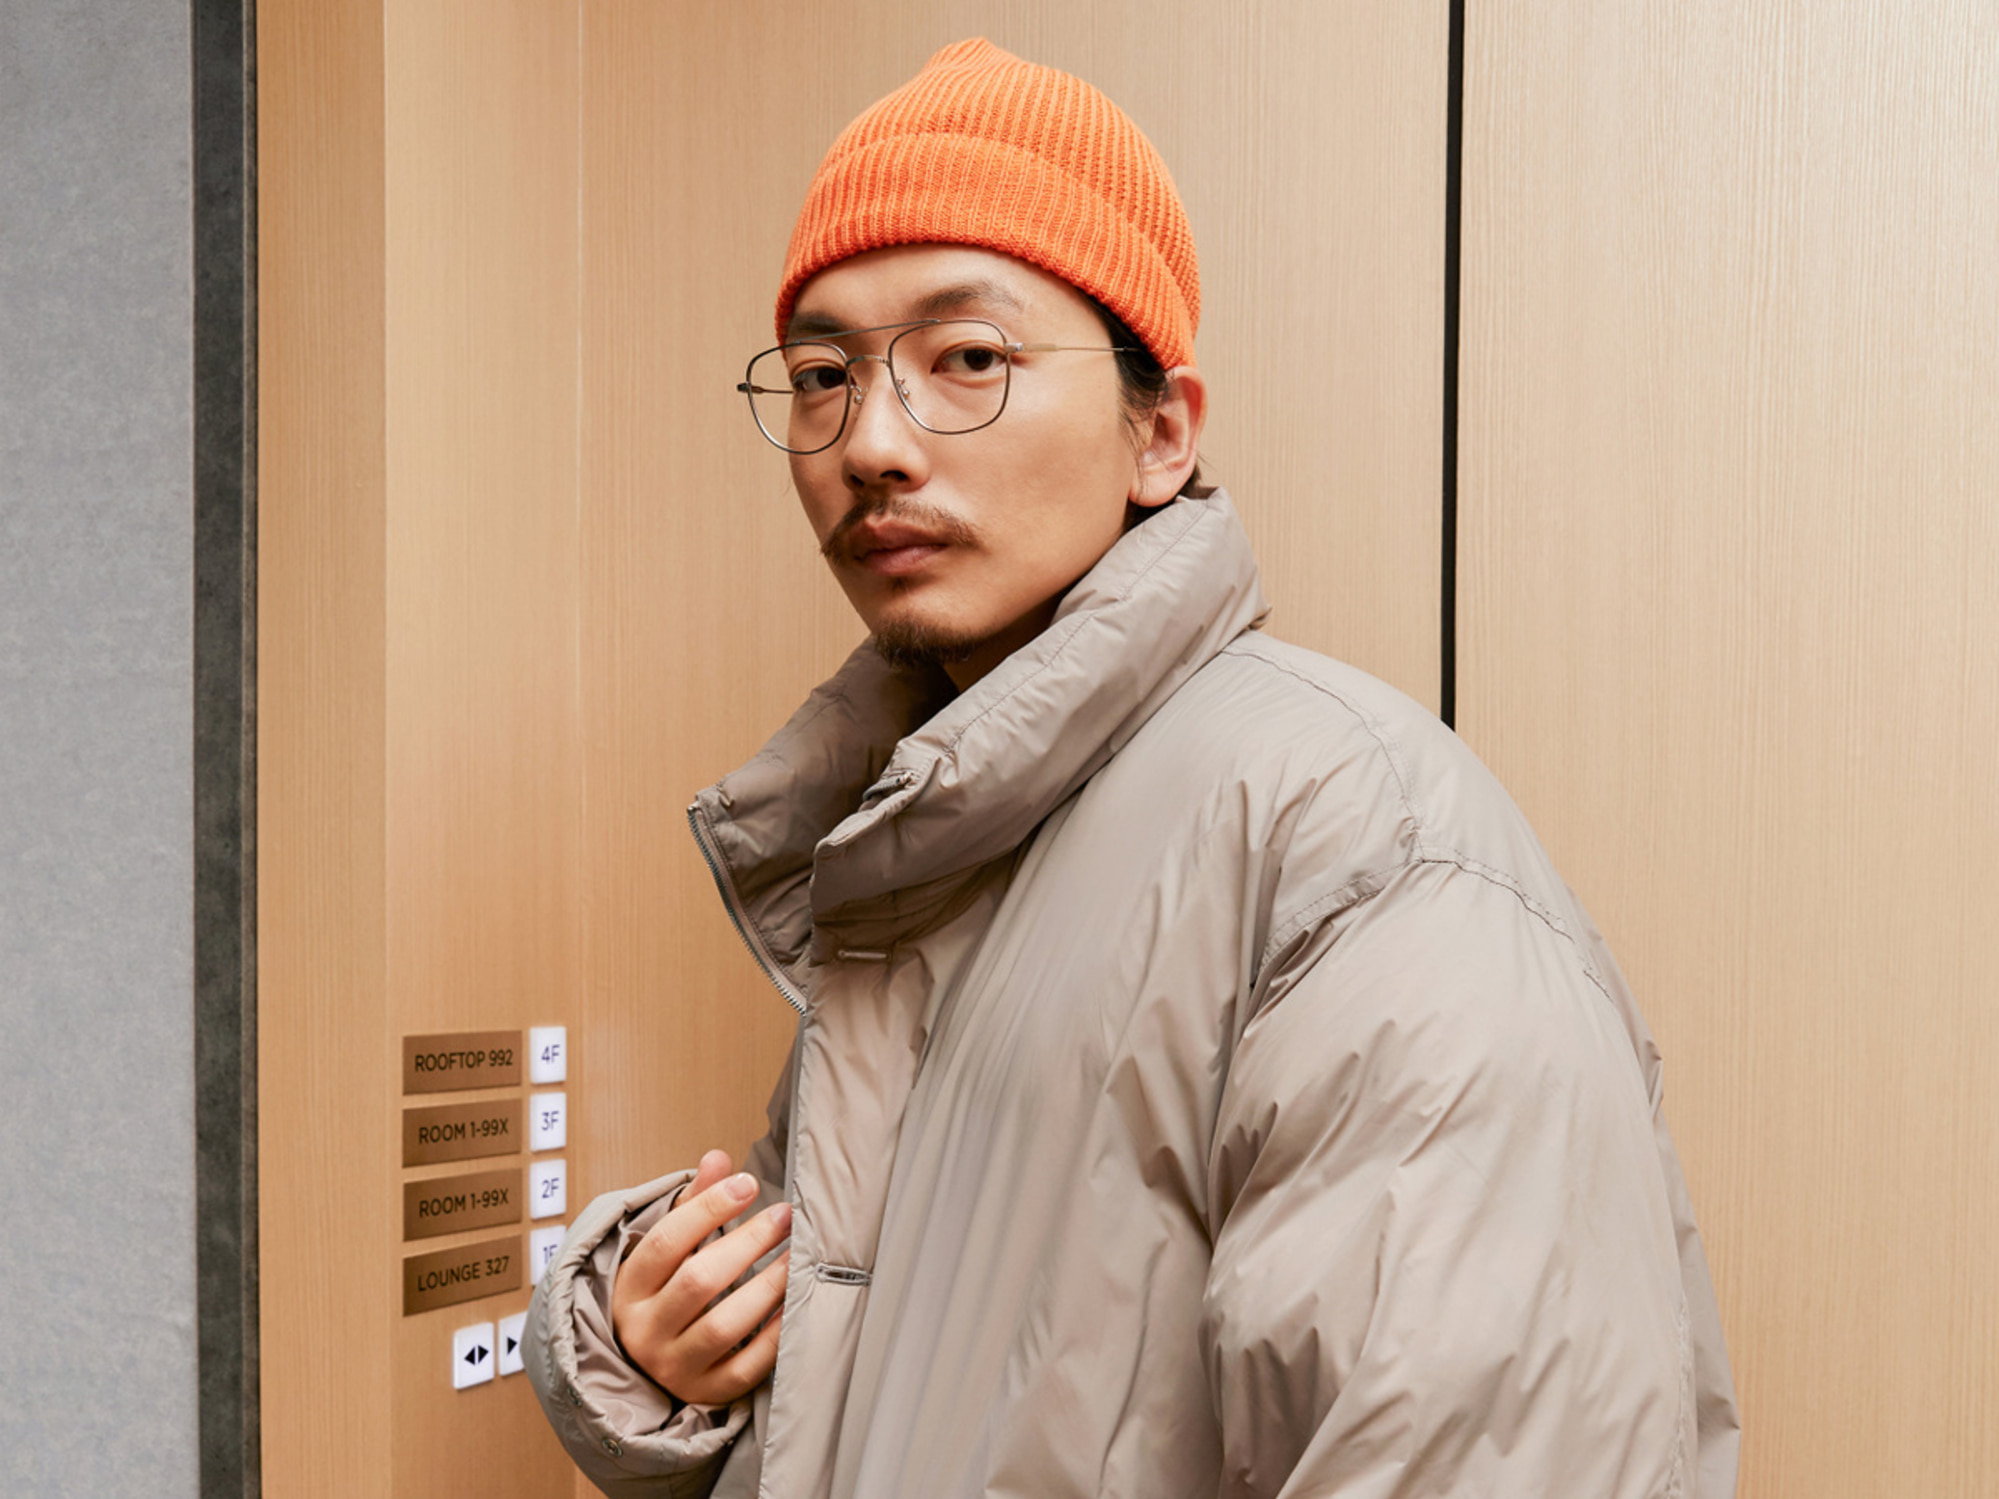 HOTEL990 : 2020 AUTUMN/WINTER COLLECTION